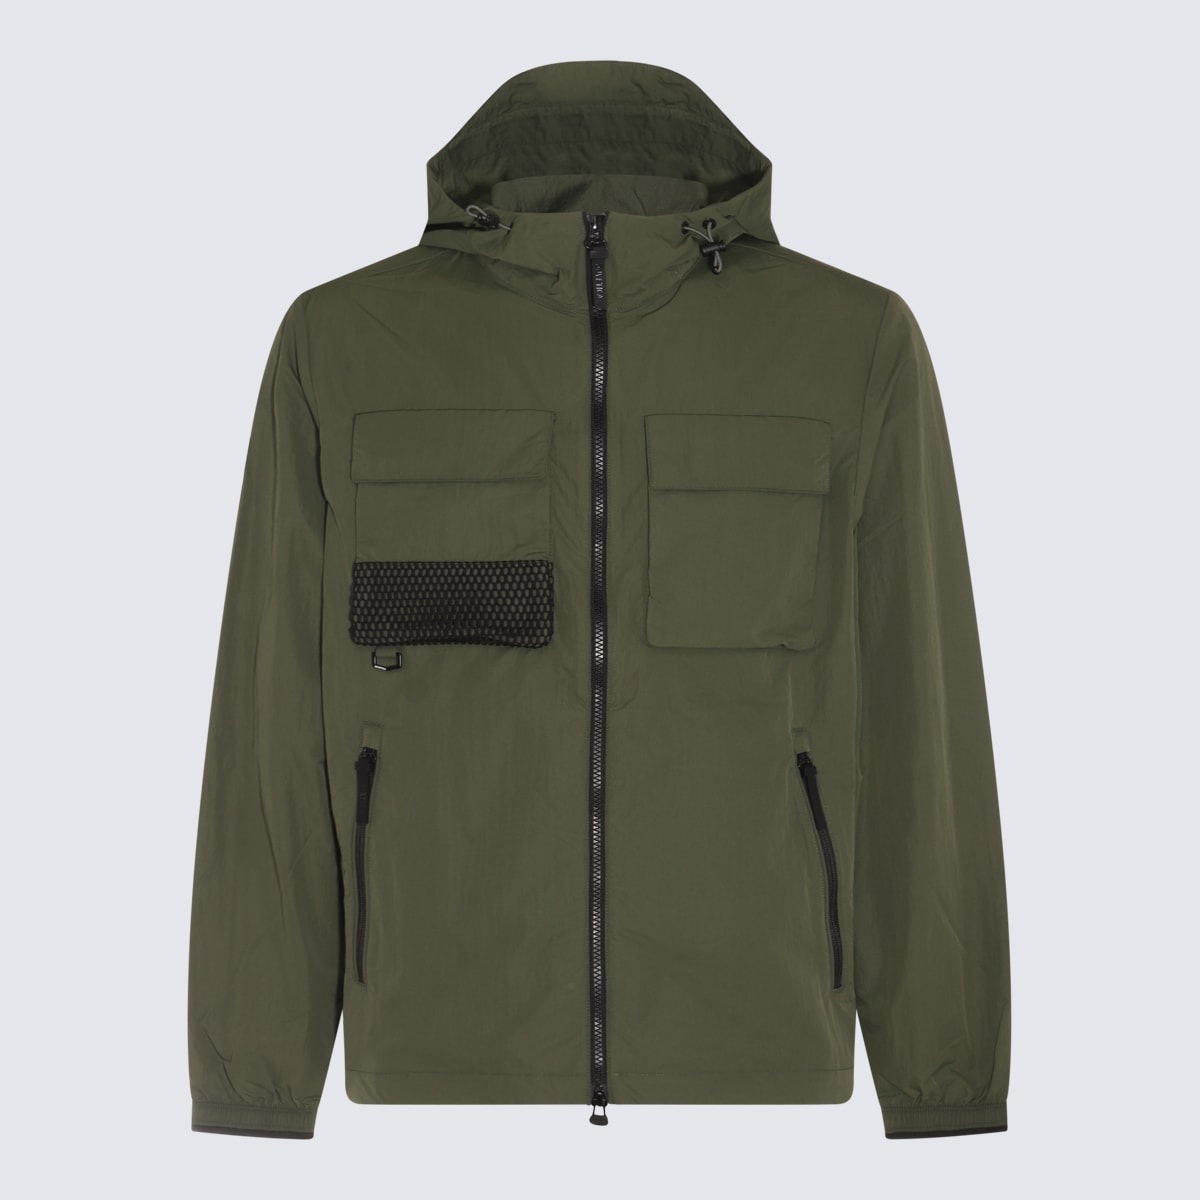 Military Casual Jacket